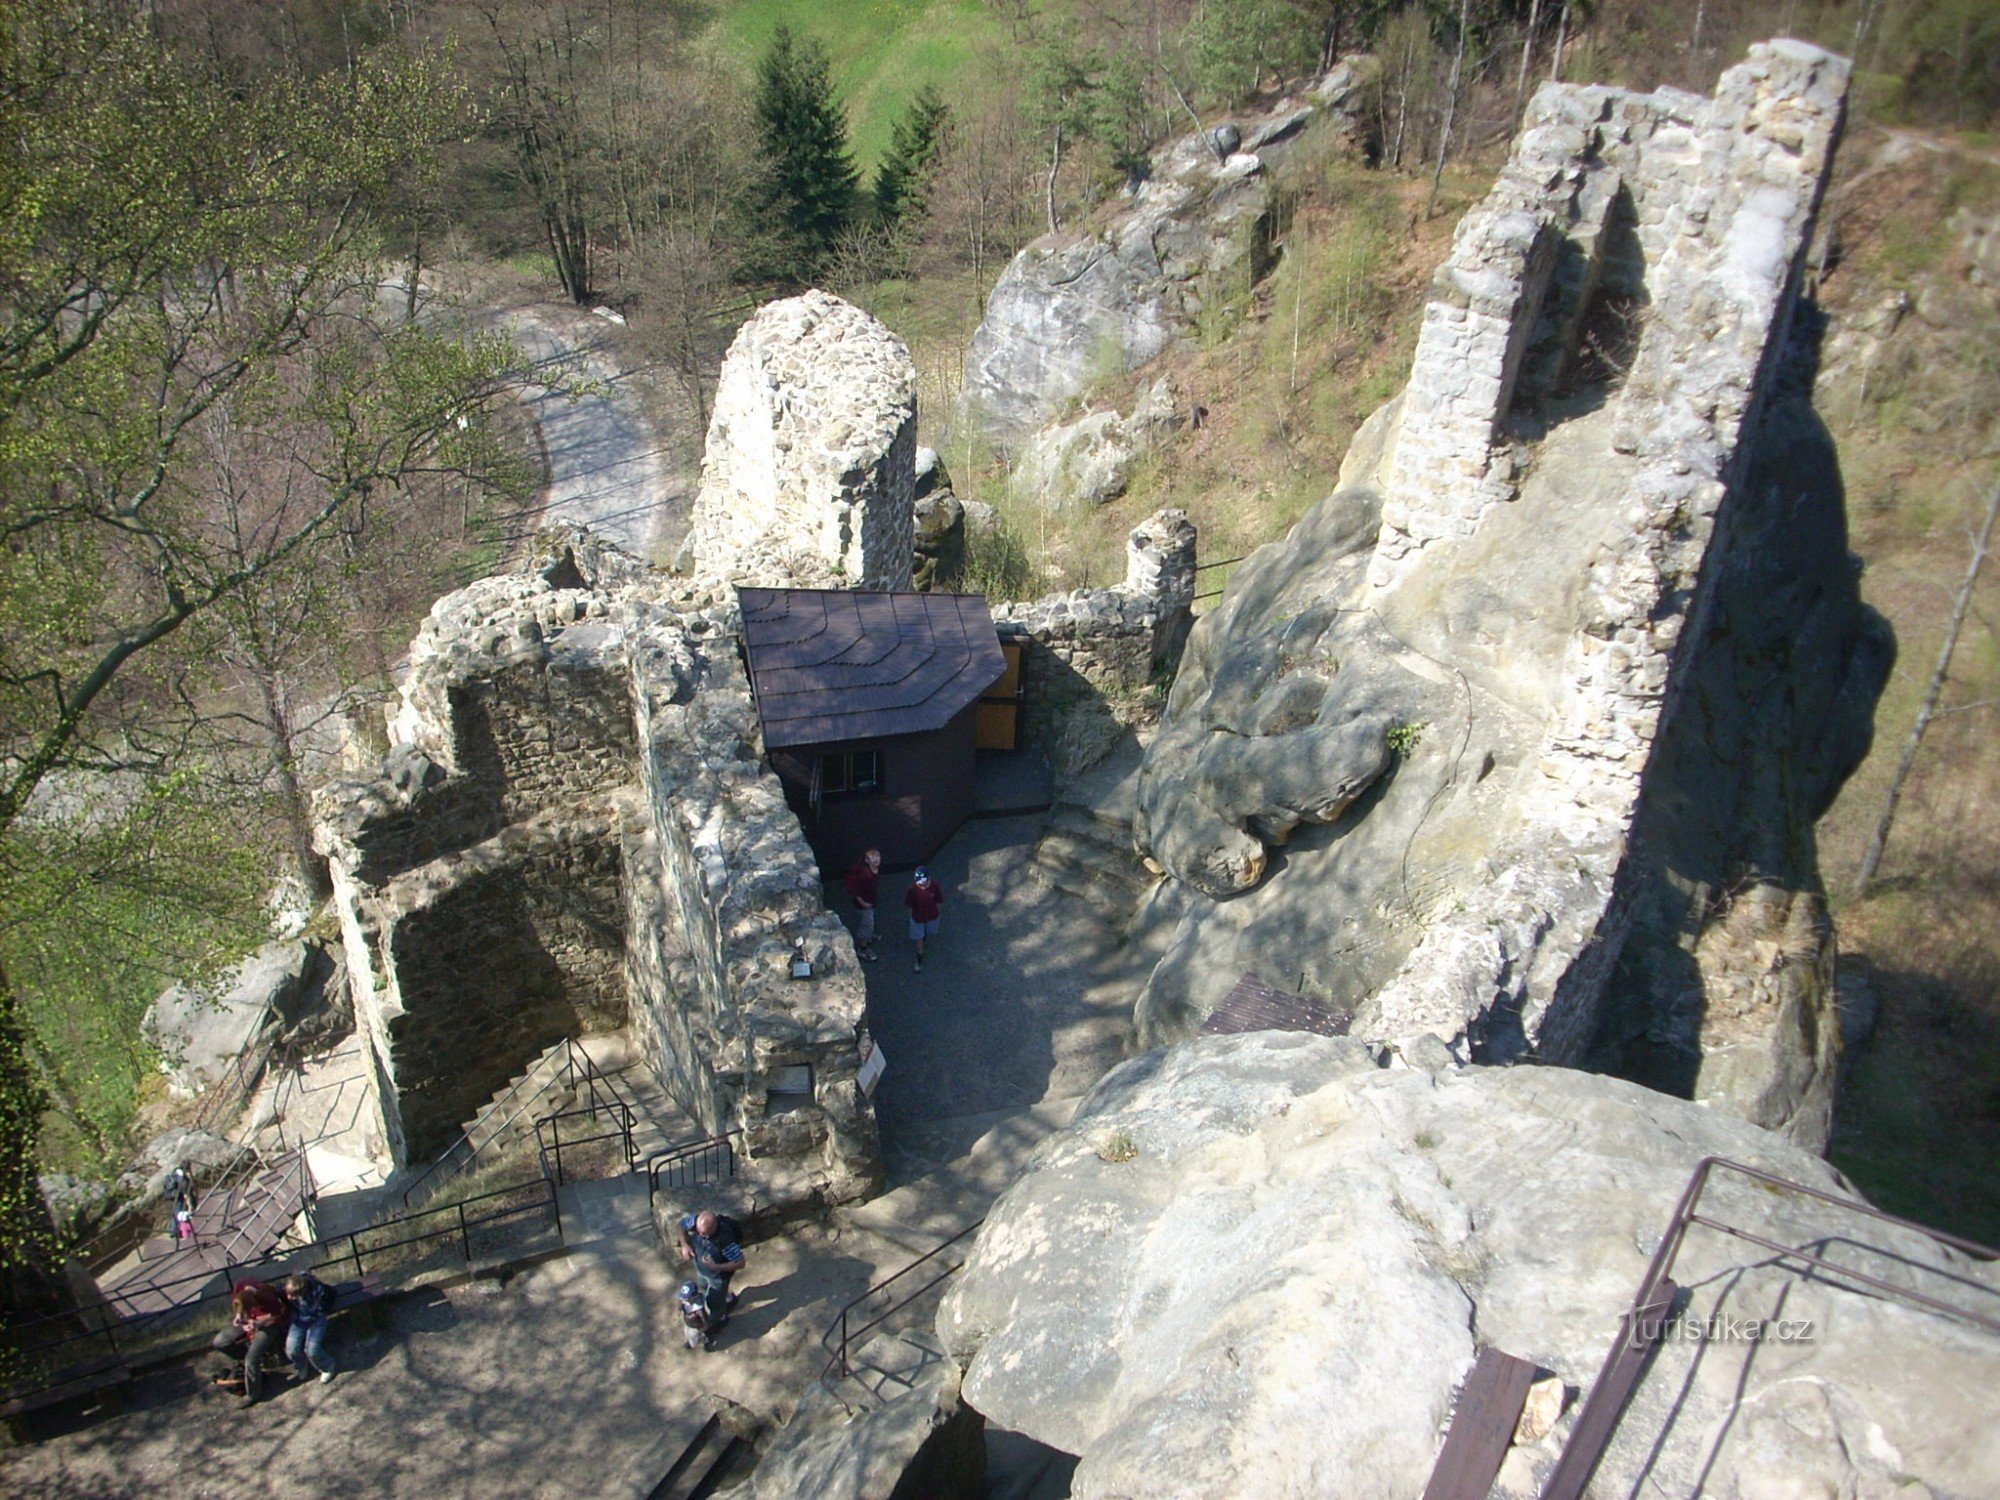 View from the main tower